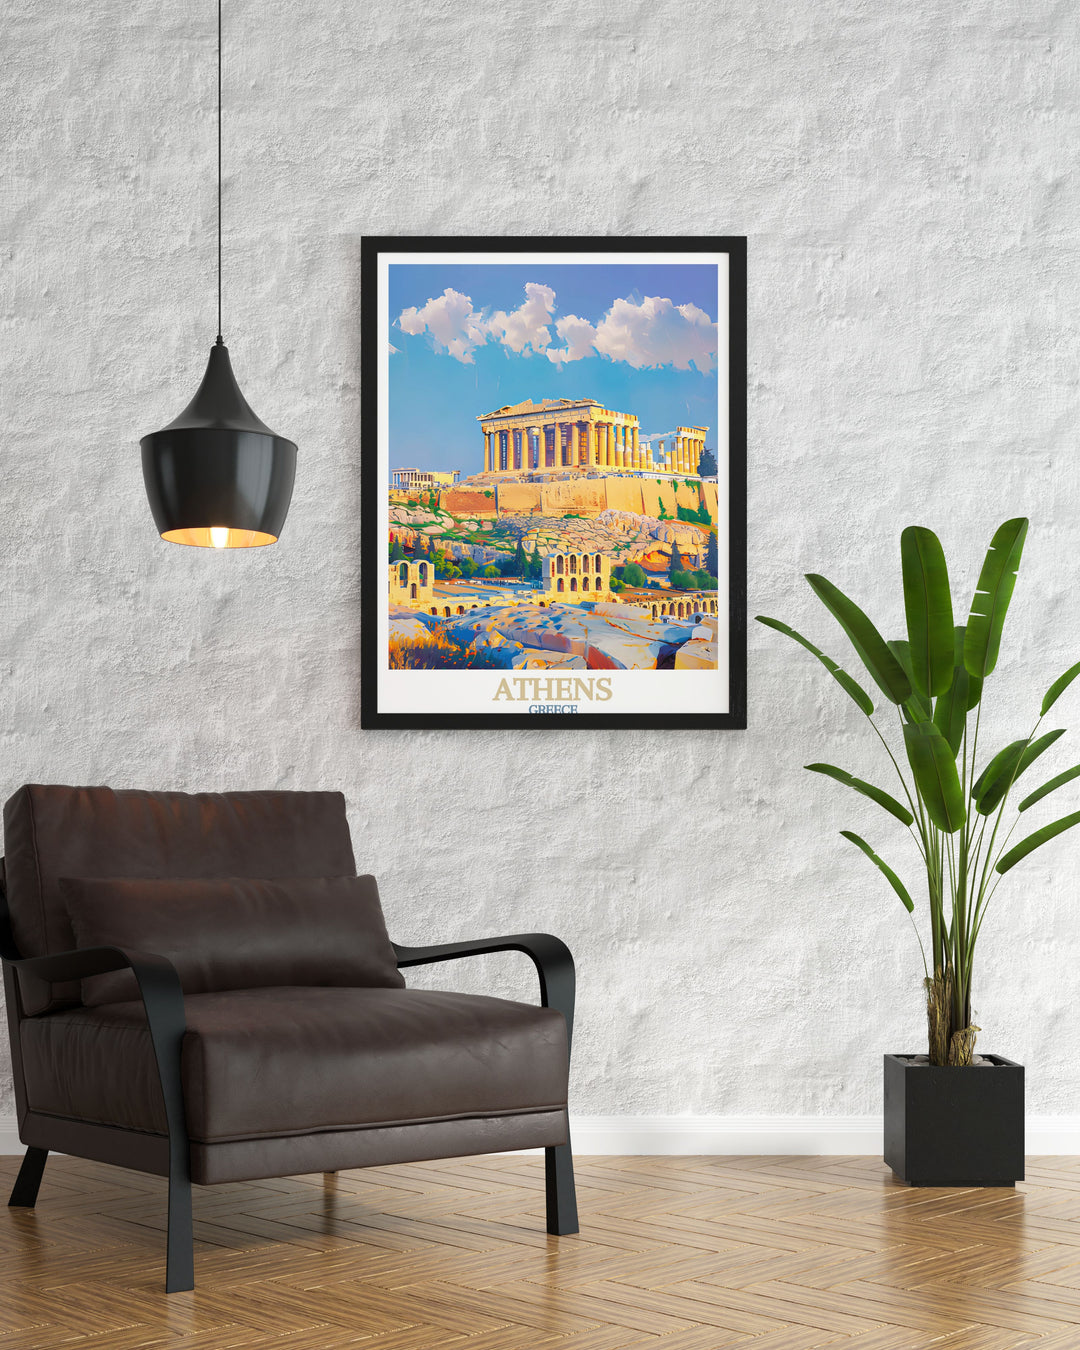 Beautiful matted art of Athens Georgia showcasing the citys intricate layout and The Acropolis. This fine line print is perfect for adding a touch of elegance to your home decor or as a thoughtful gift.